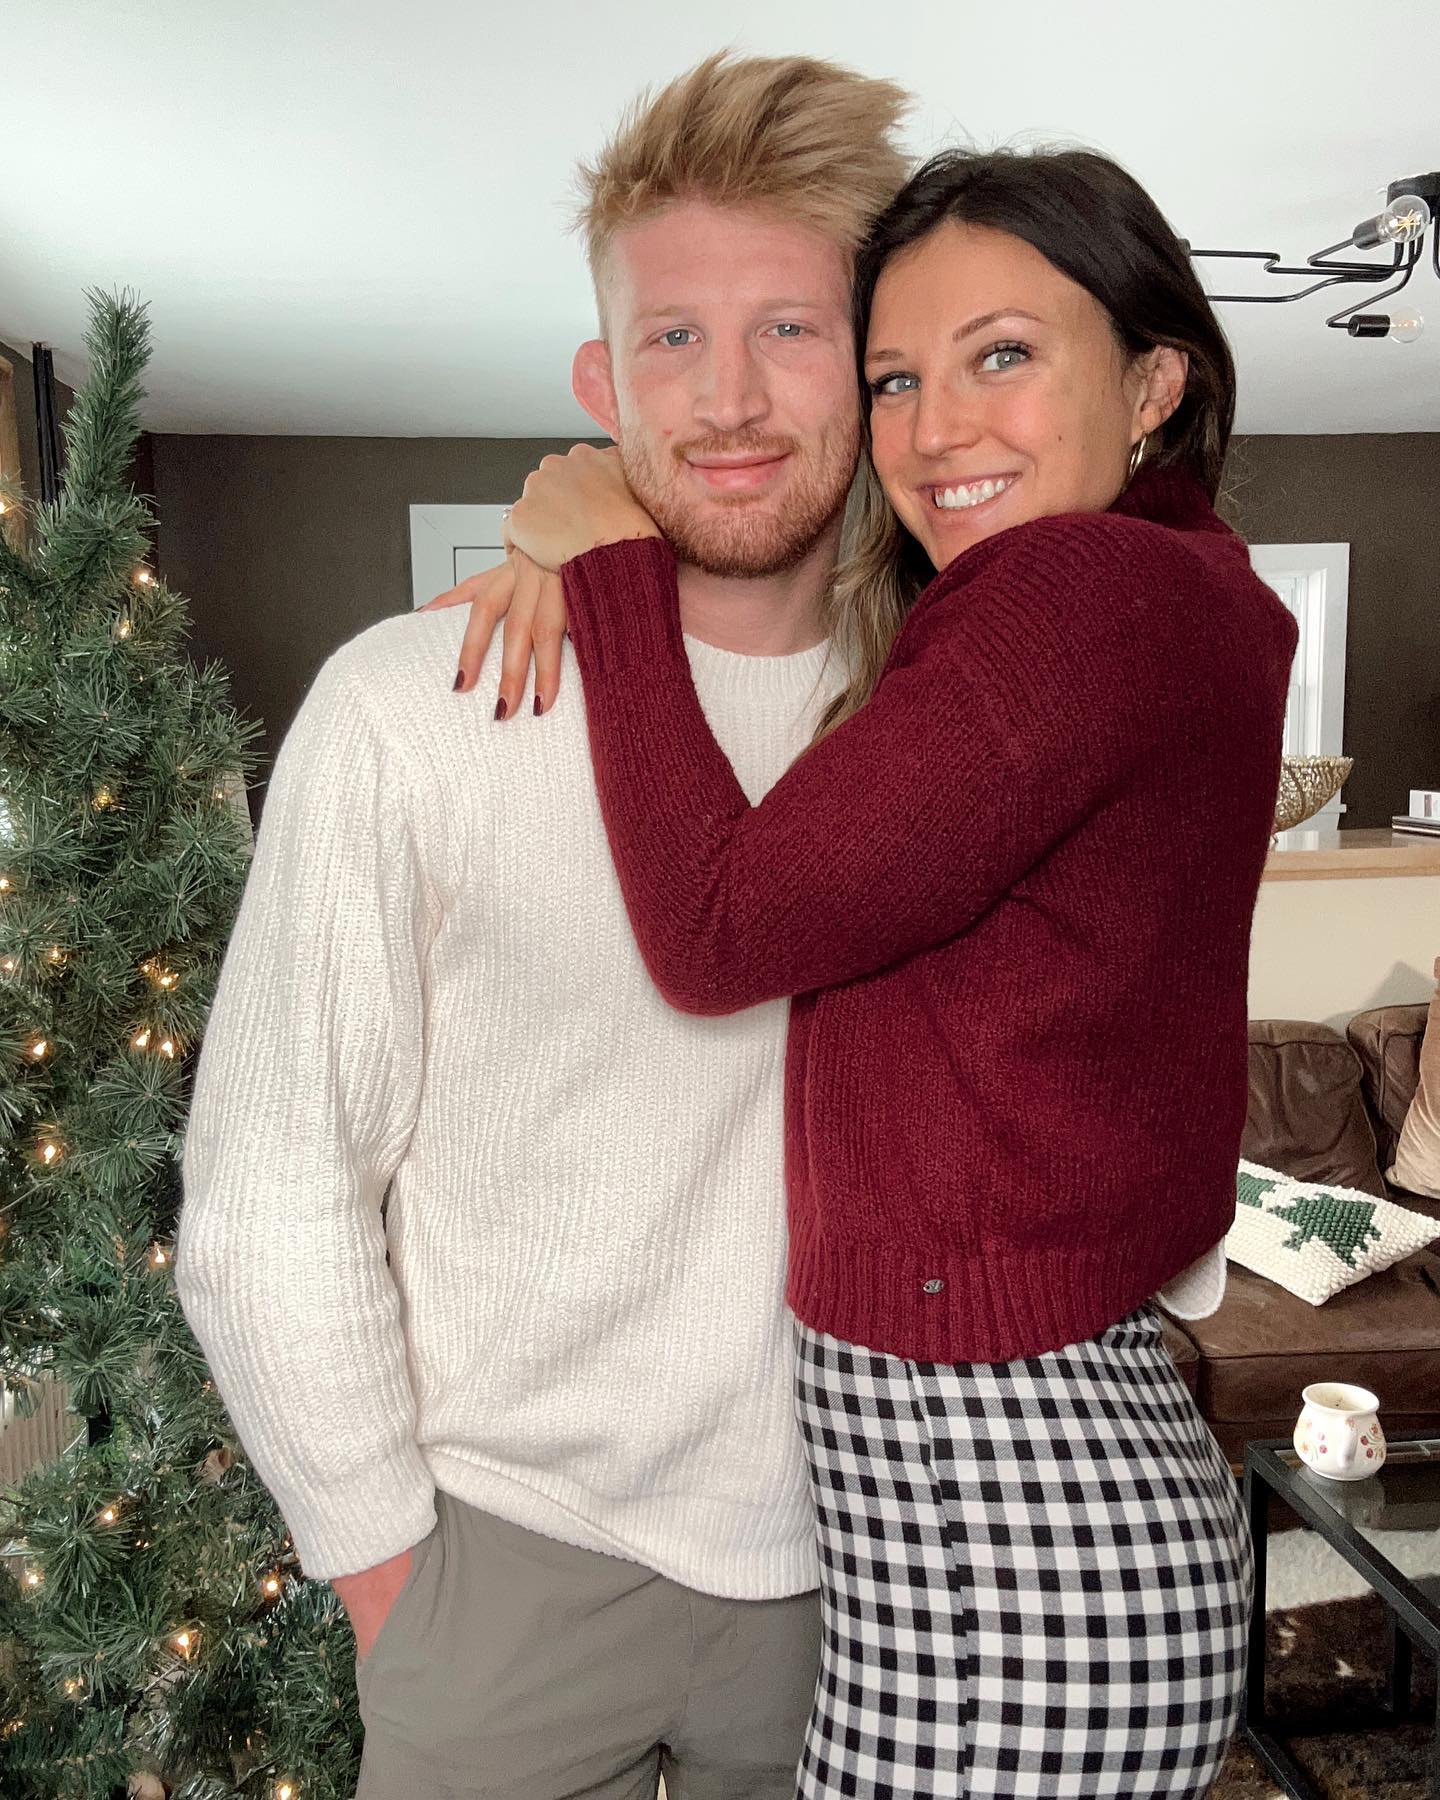 Middleweight prospect Bo Nickal met his wife Maddie at university